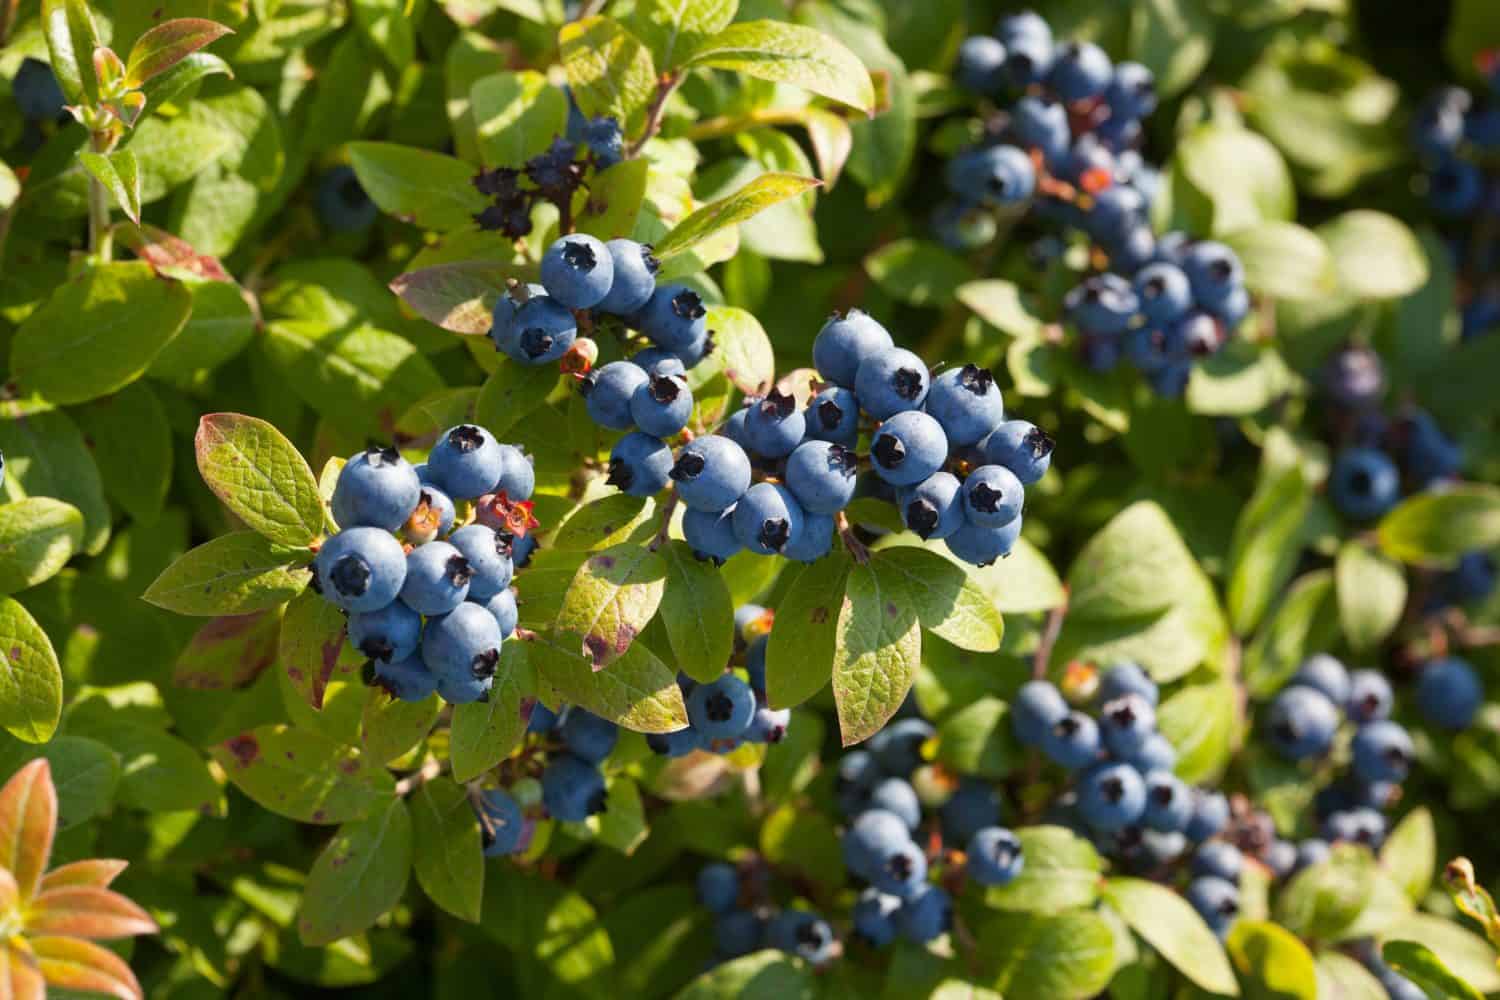 A medium shot of a field of Blueberries in Maine, USA during mid August, Summer.